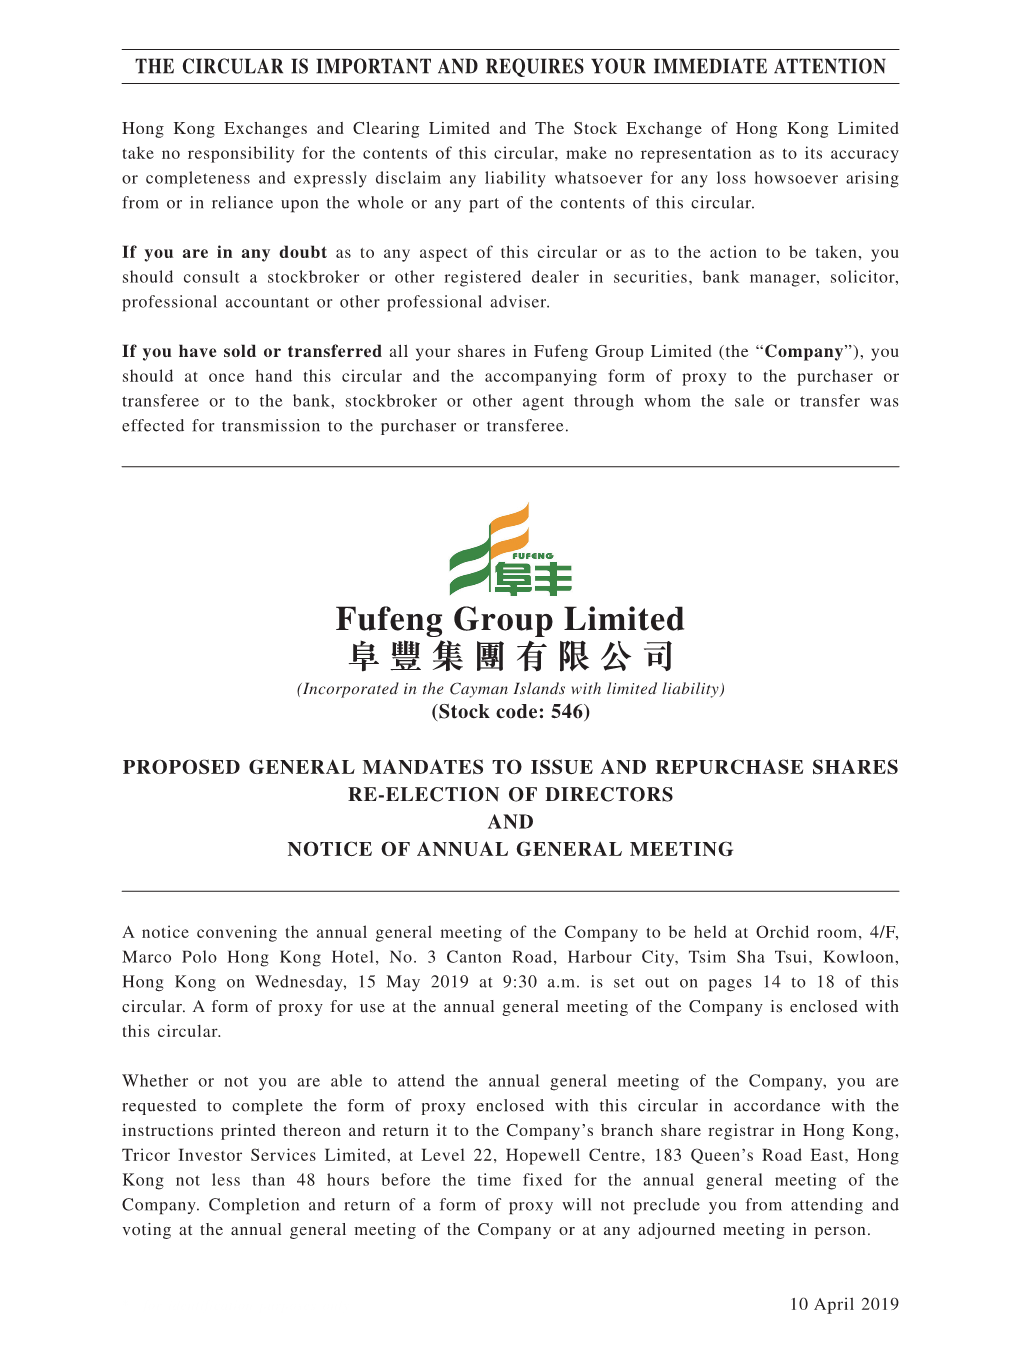 Fufeng Group Limited 阜豐集團有限公司 (Incorporated in the Cayman Islands with Limited Liability) (Stock Code: 546)